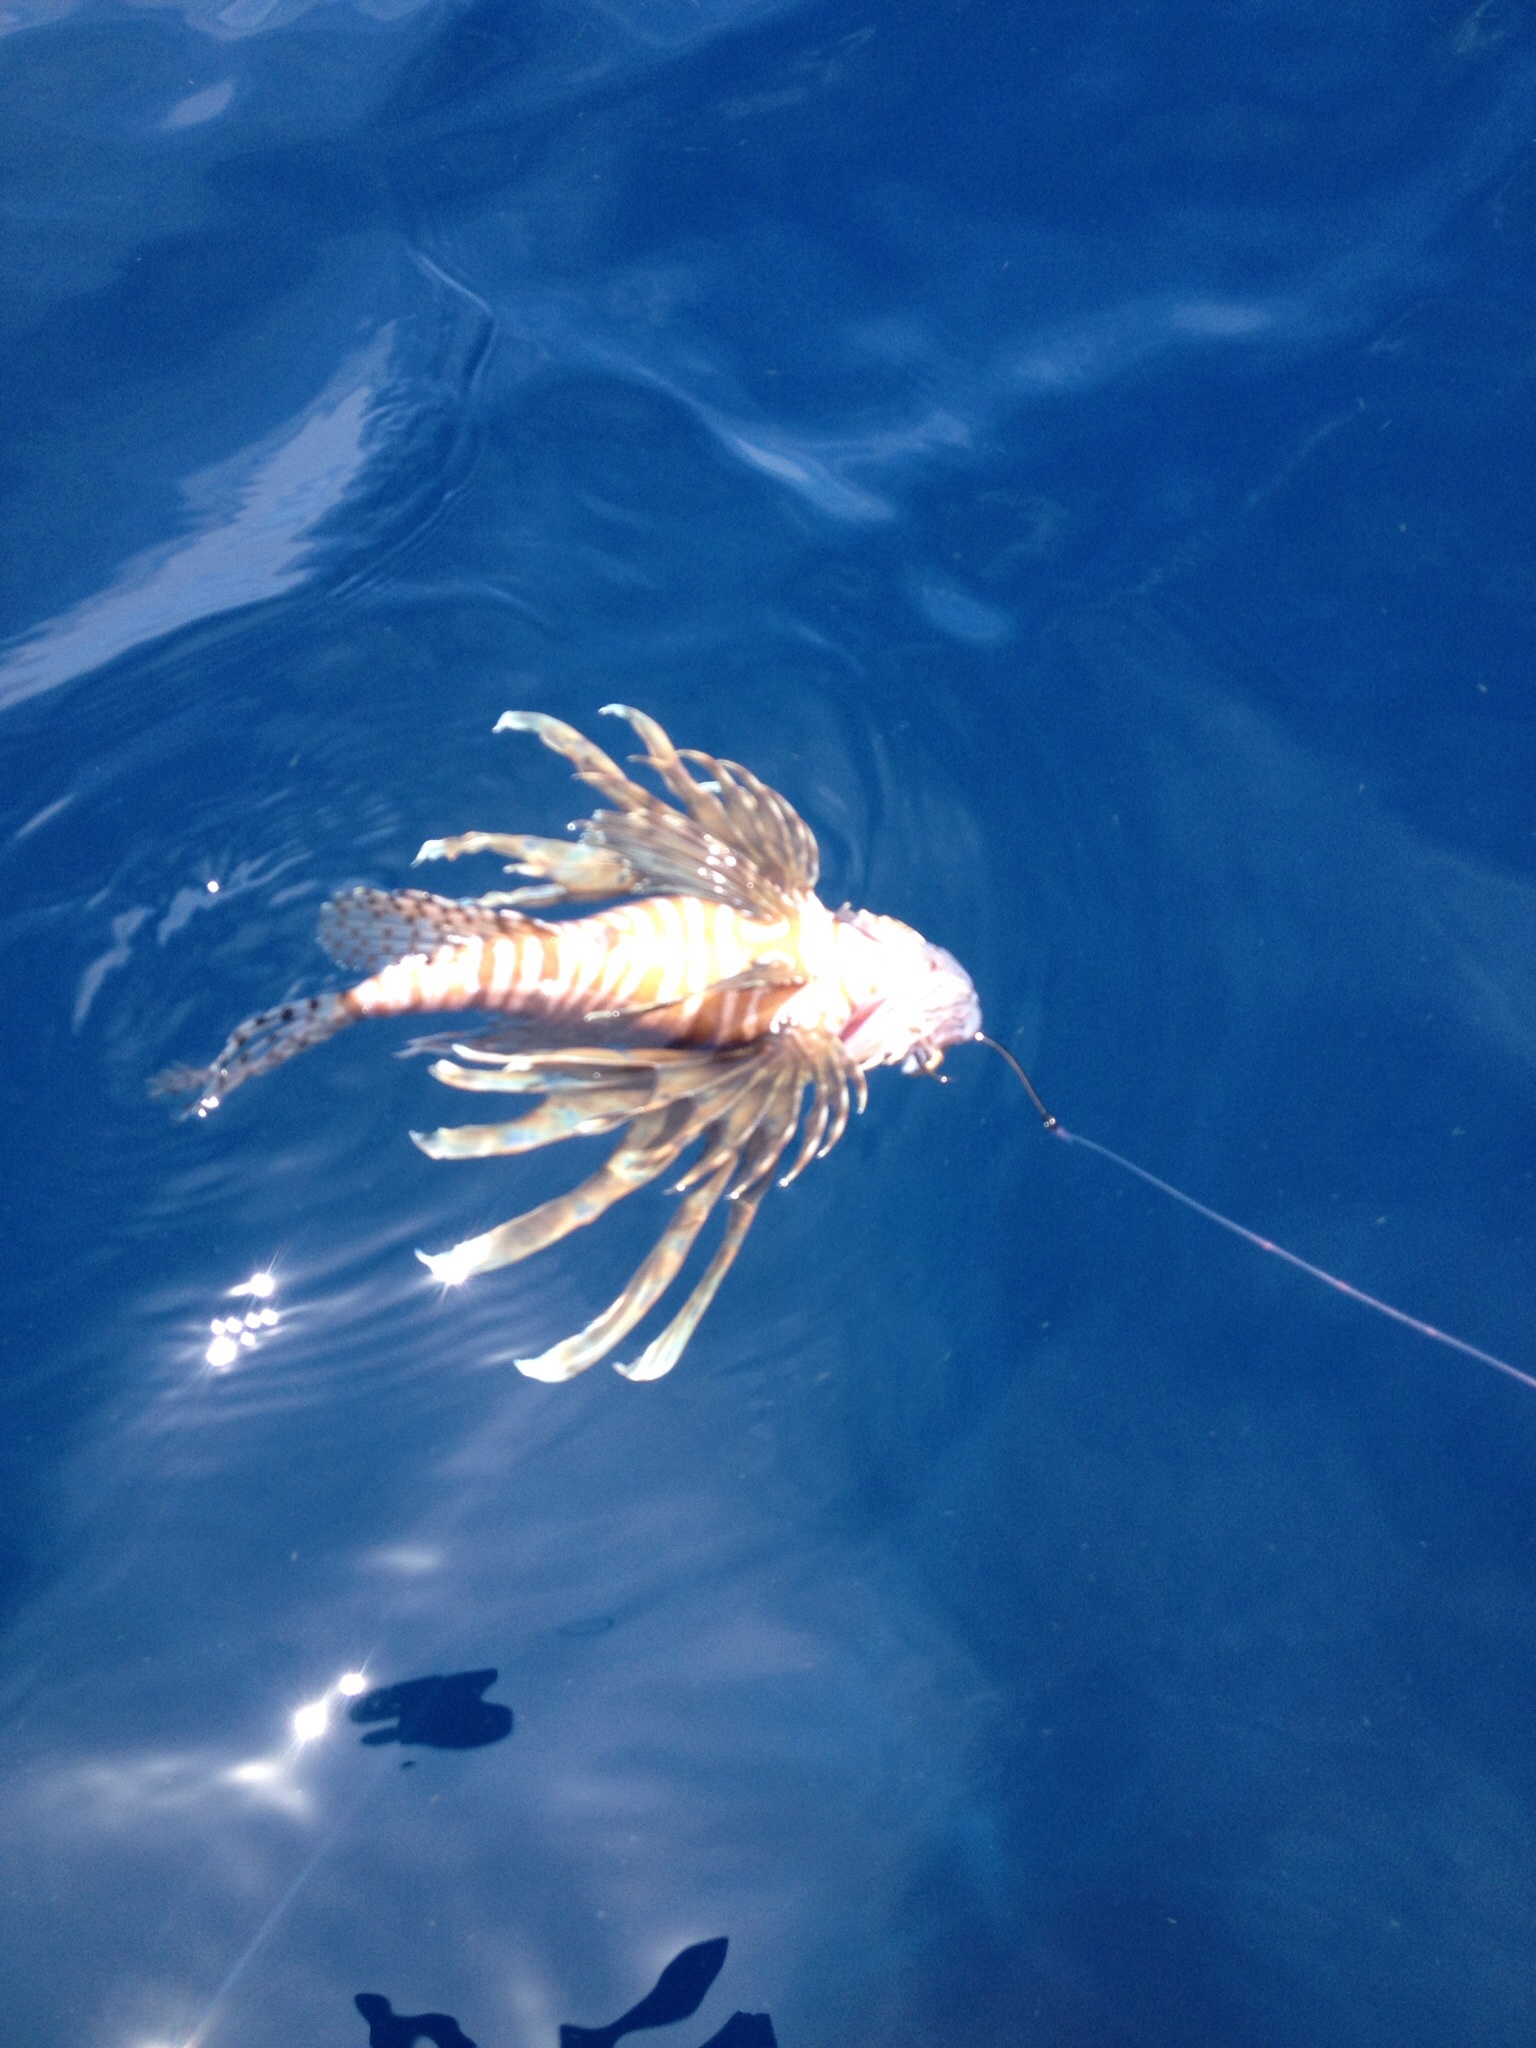 NISAW 2016 – An Update on the Lionfish Situation in the Panhandle